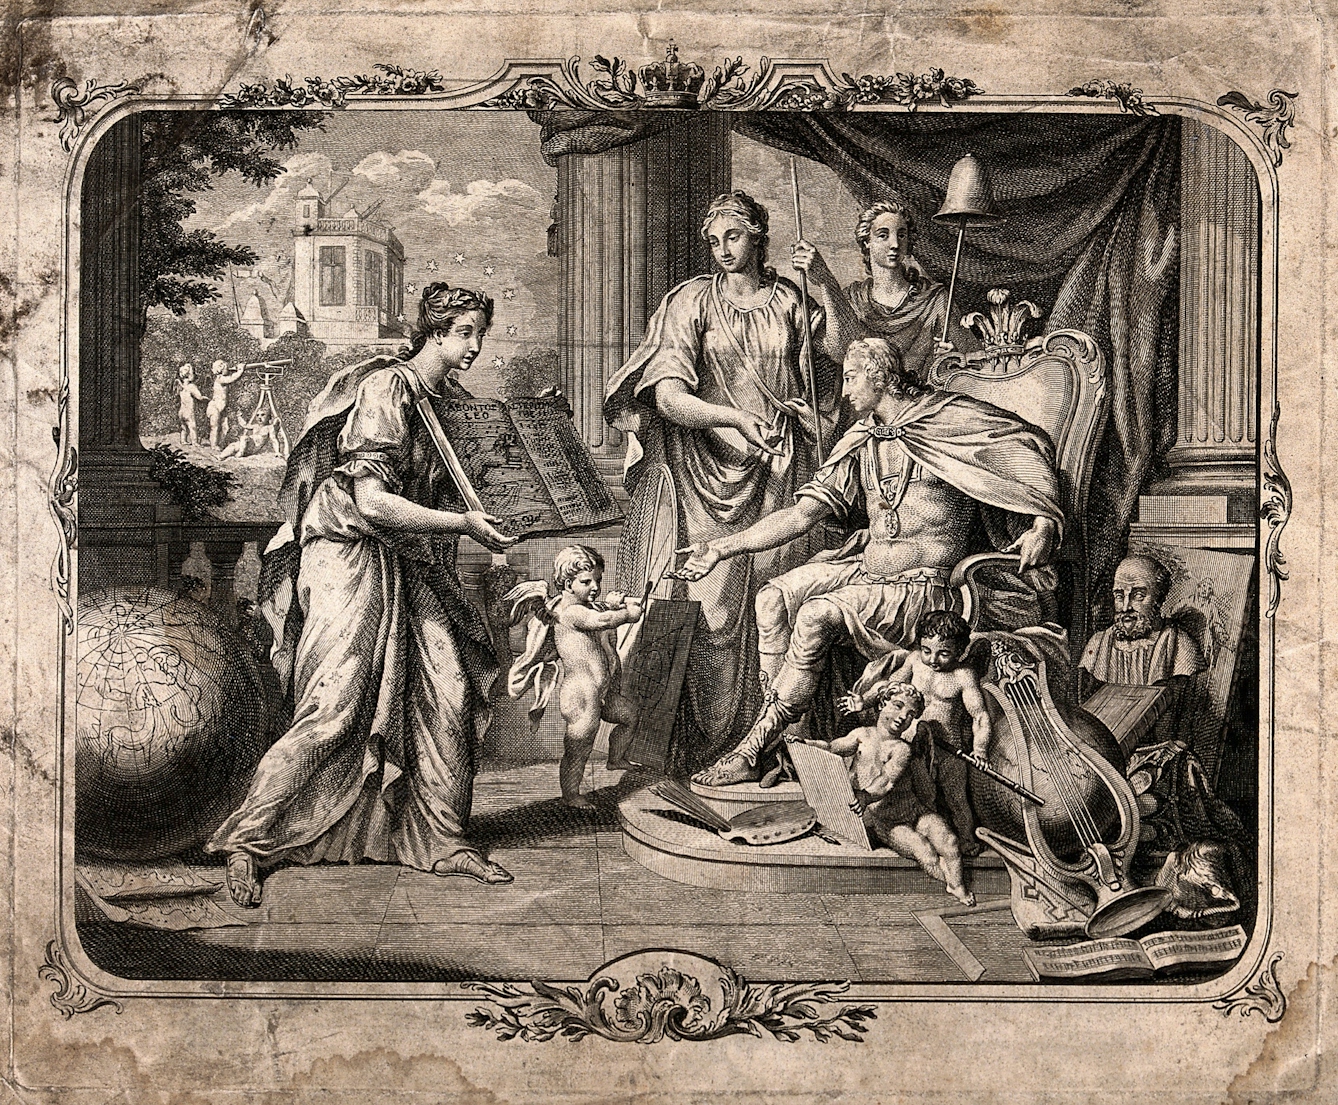 Black and white engraving showing a woman with a large book, showing it to a seated man.